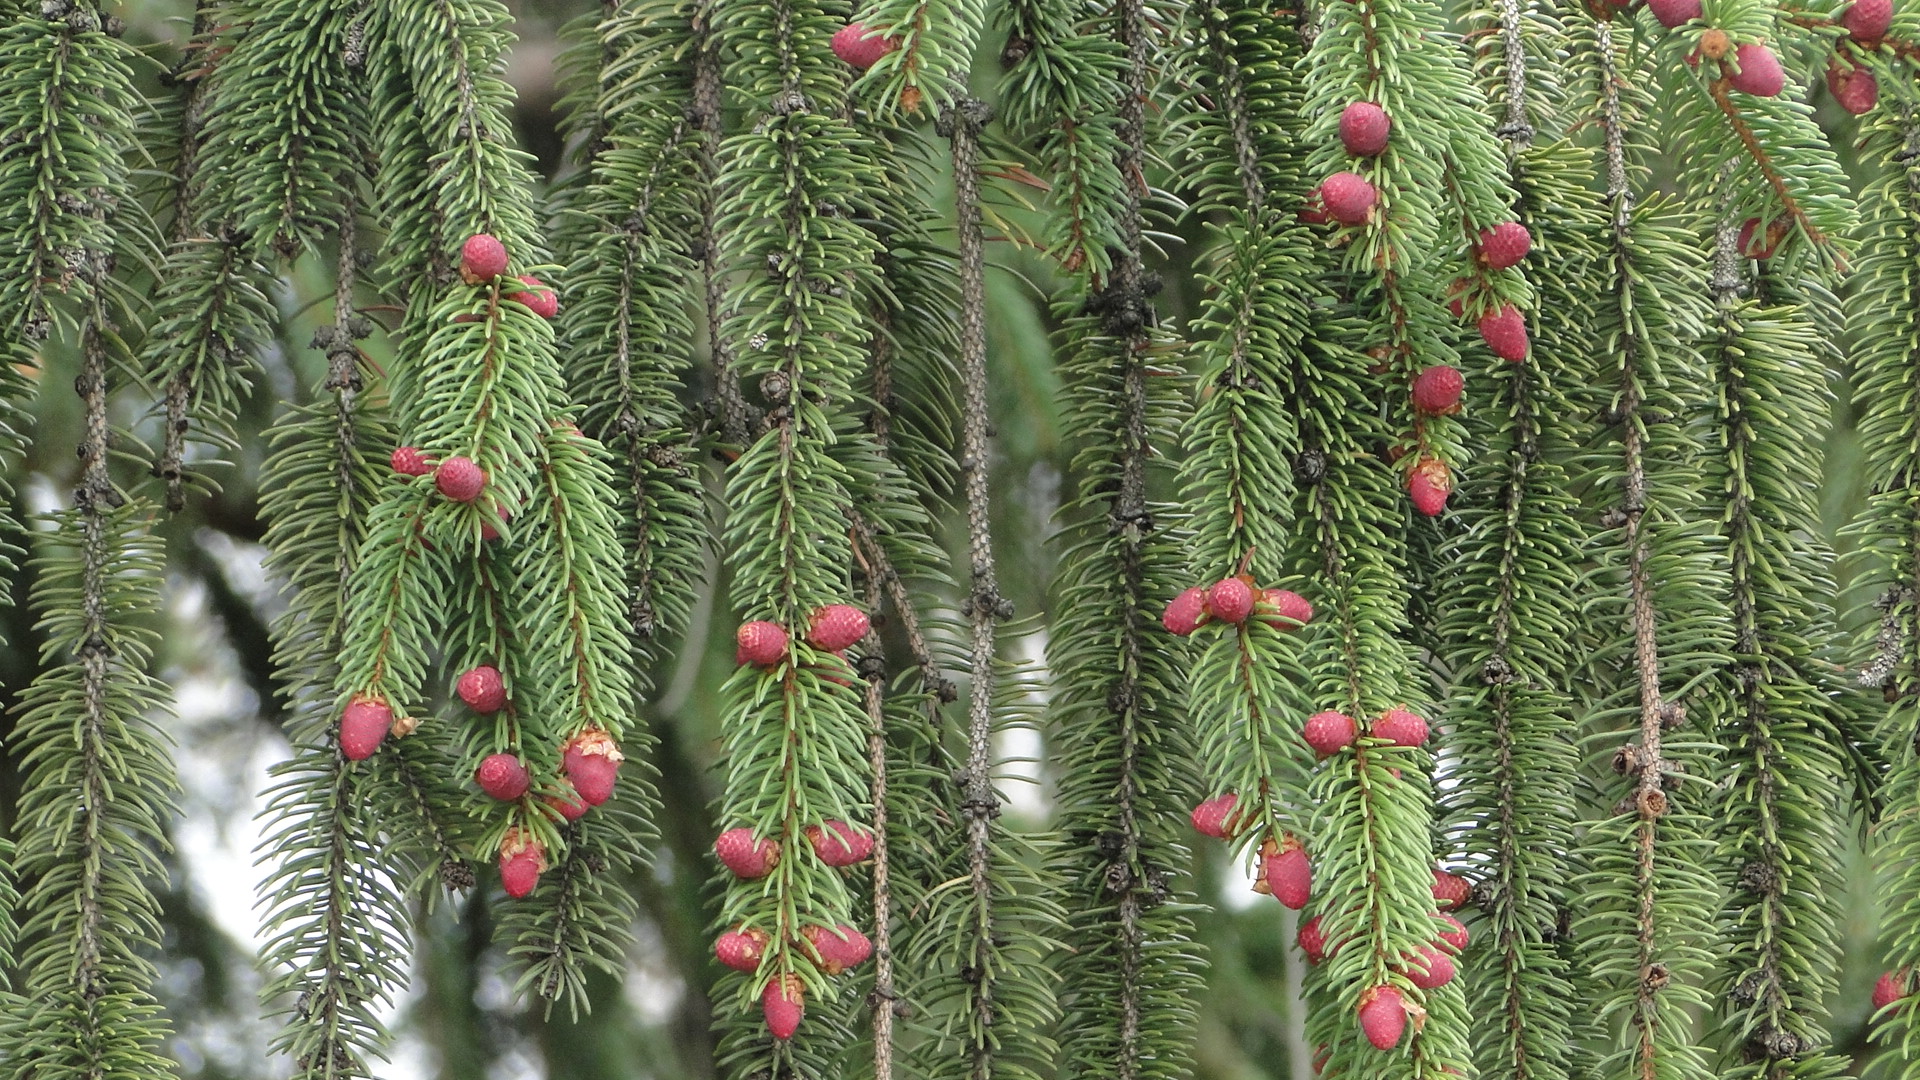 Emerging male Norway spruce cones